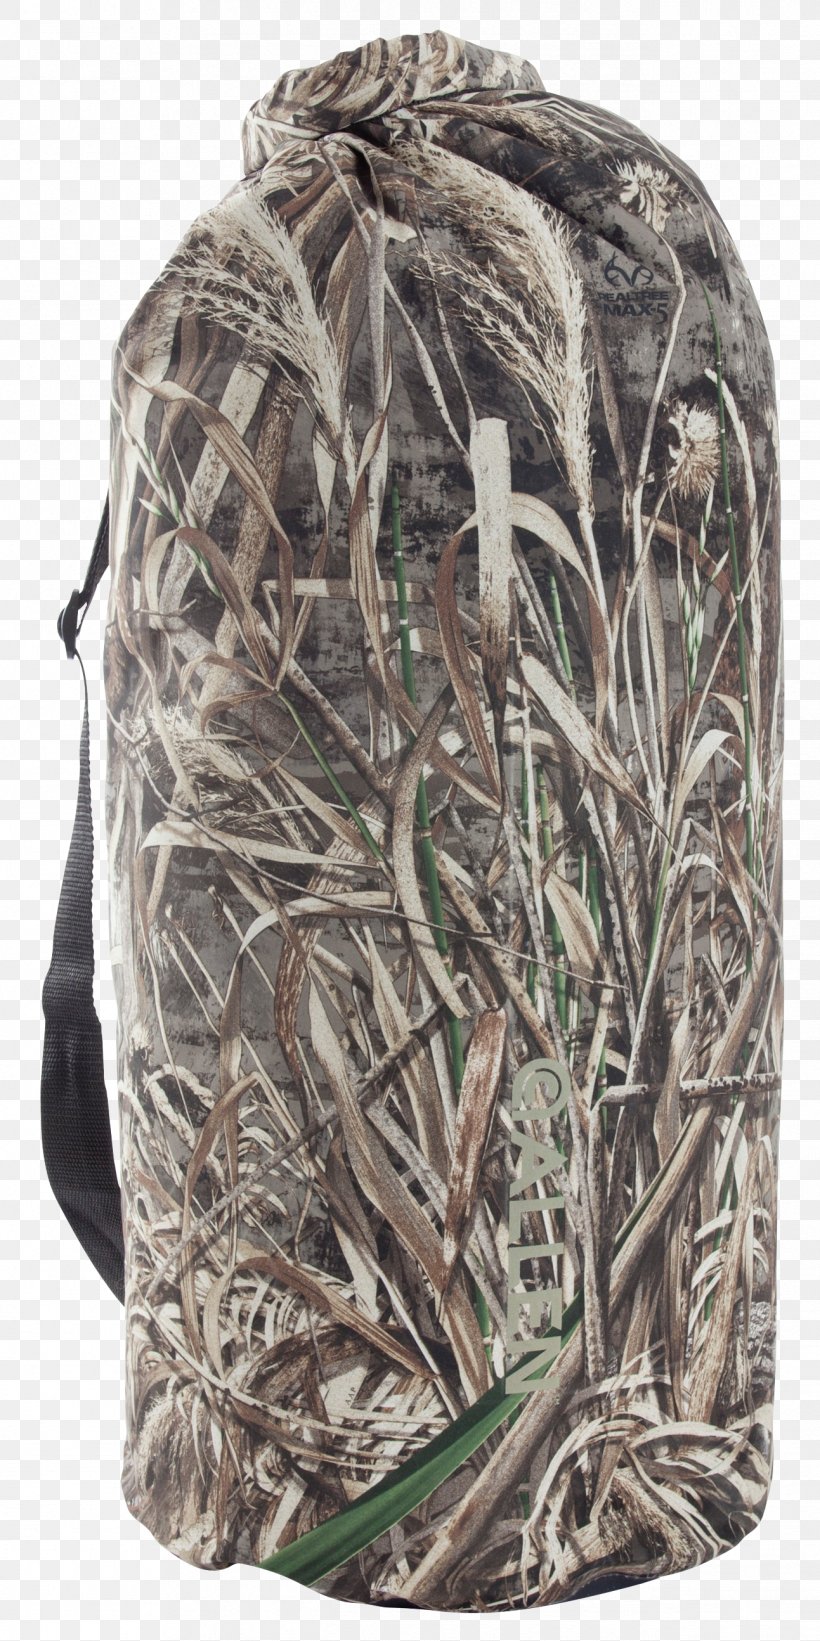 Bag Gunny Sack Max Hamburgers Outdoor Recreation Hunting, PNG, 1293x2589px, Bag, Backpack, Camouflage, Camping, Duffel Bags Download Free